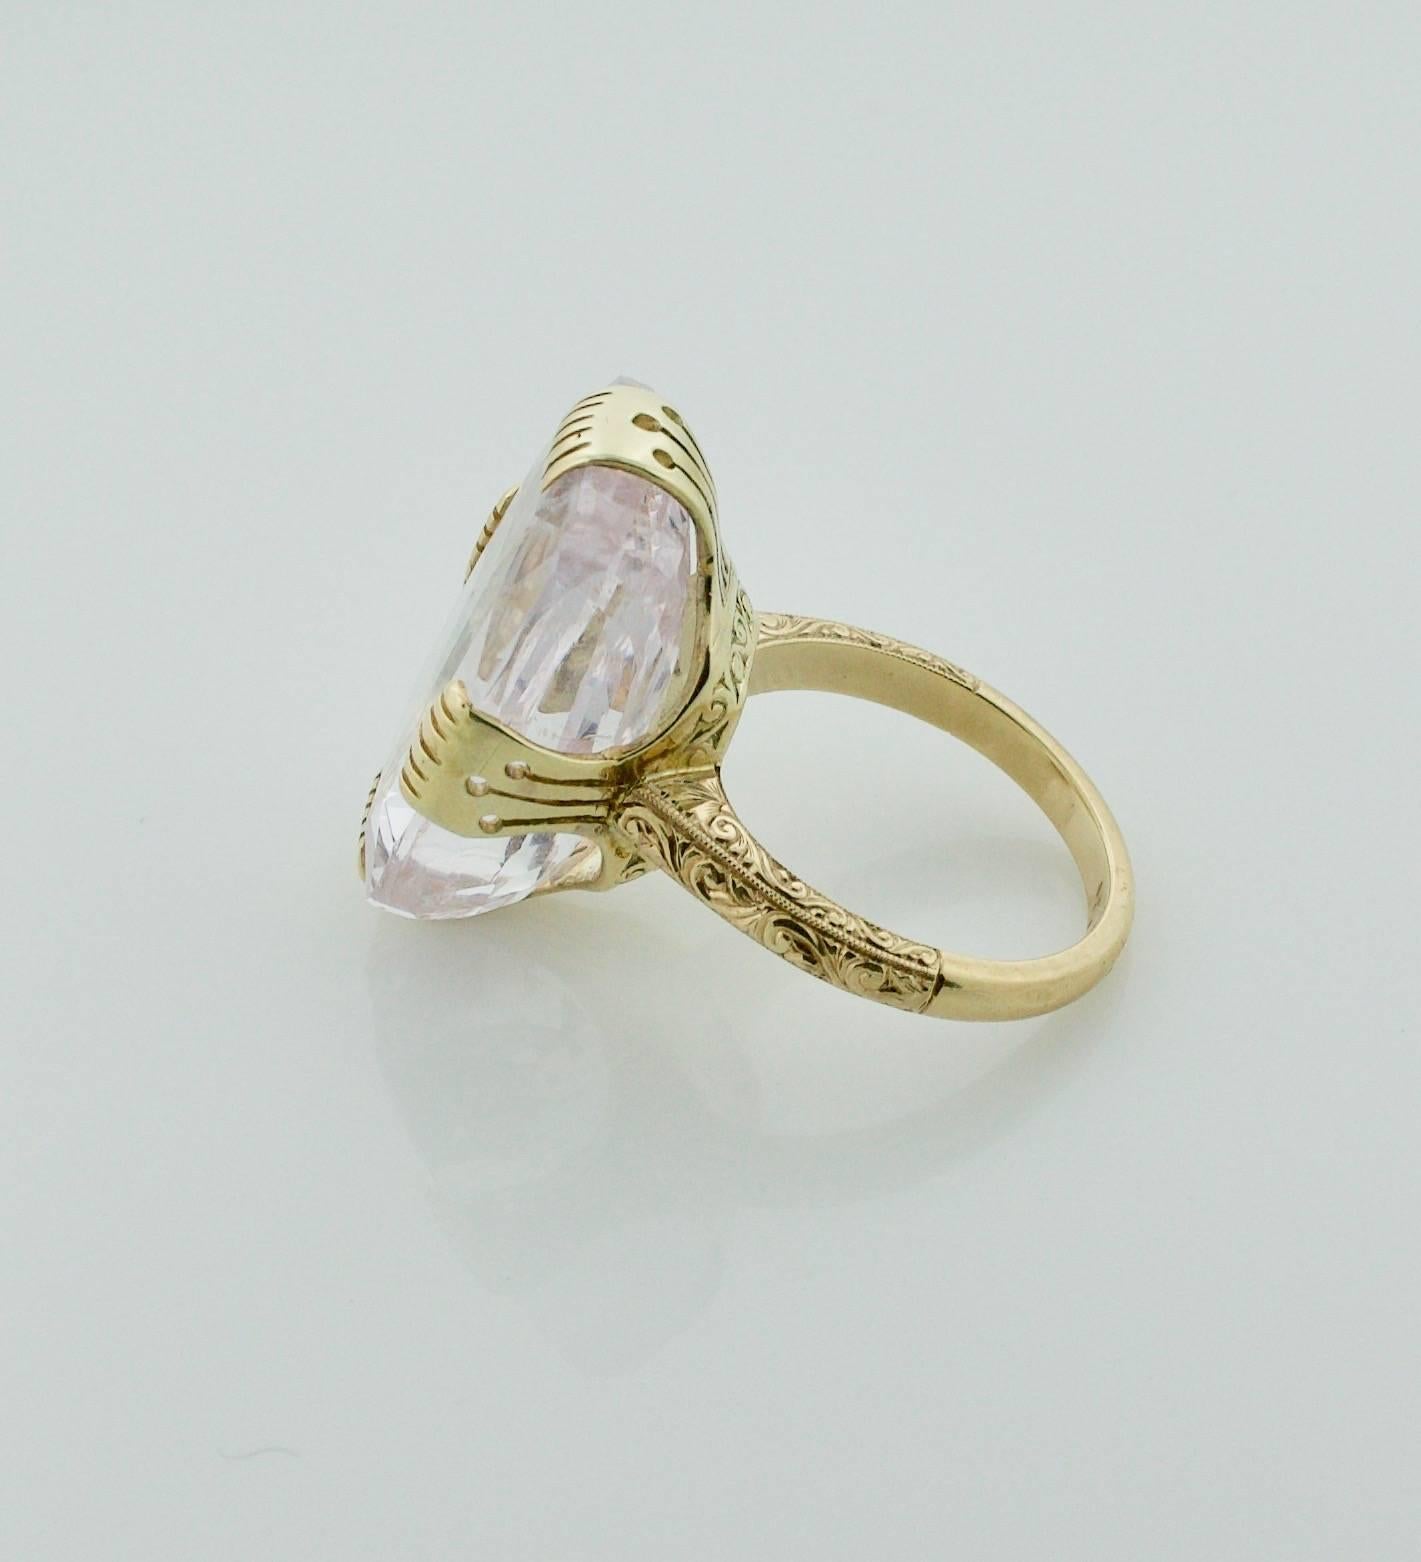 35.90 Carat Pastel Pink Sapphire Ring in 18 Karat Yellow Gold In Excellent Condition For Sale In Wailea, HI